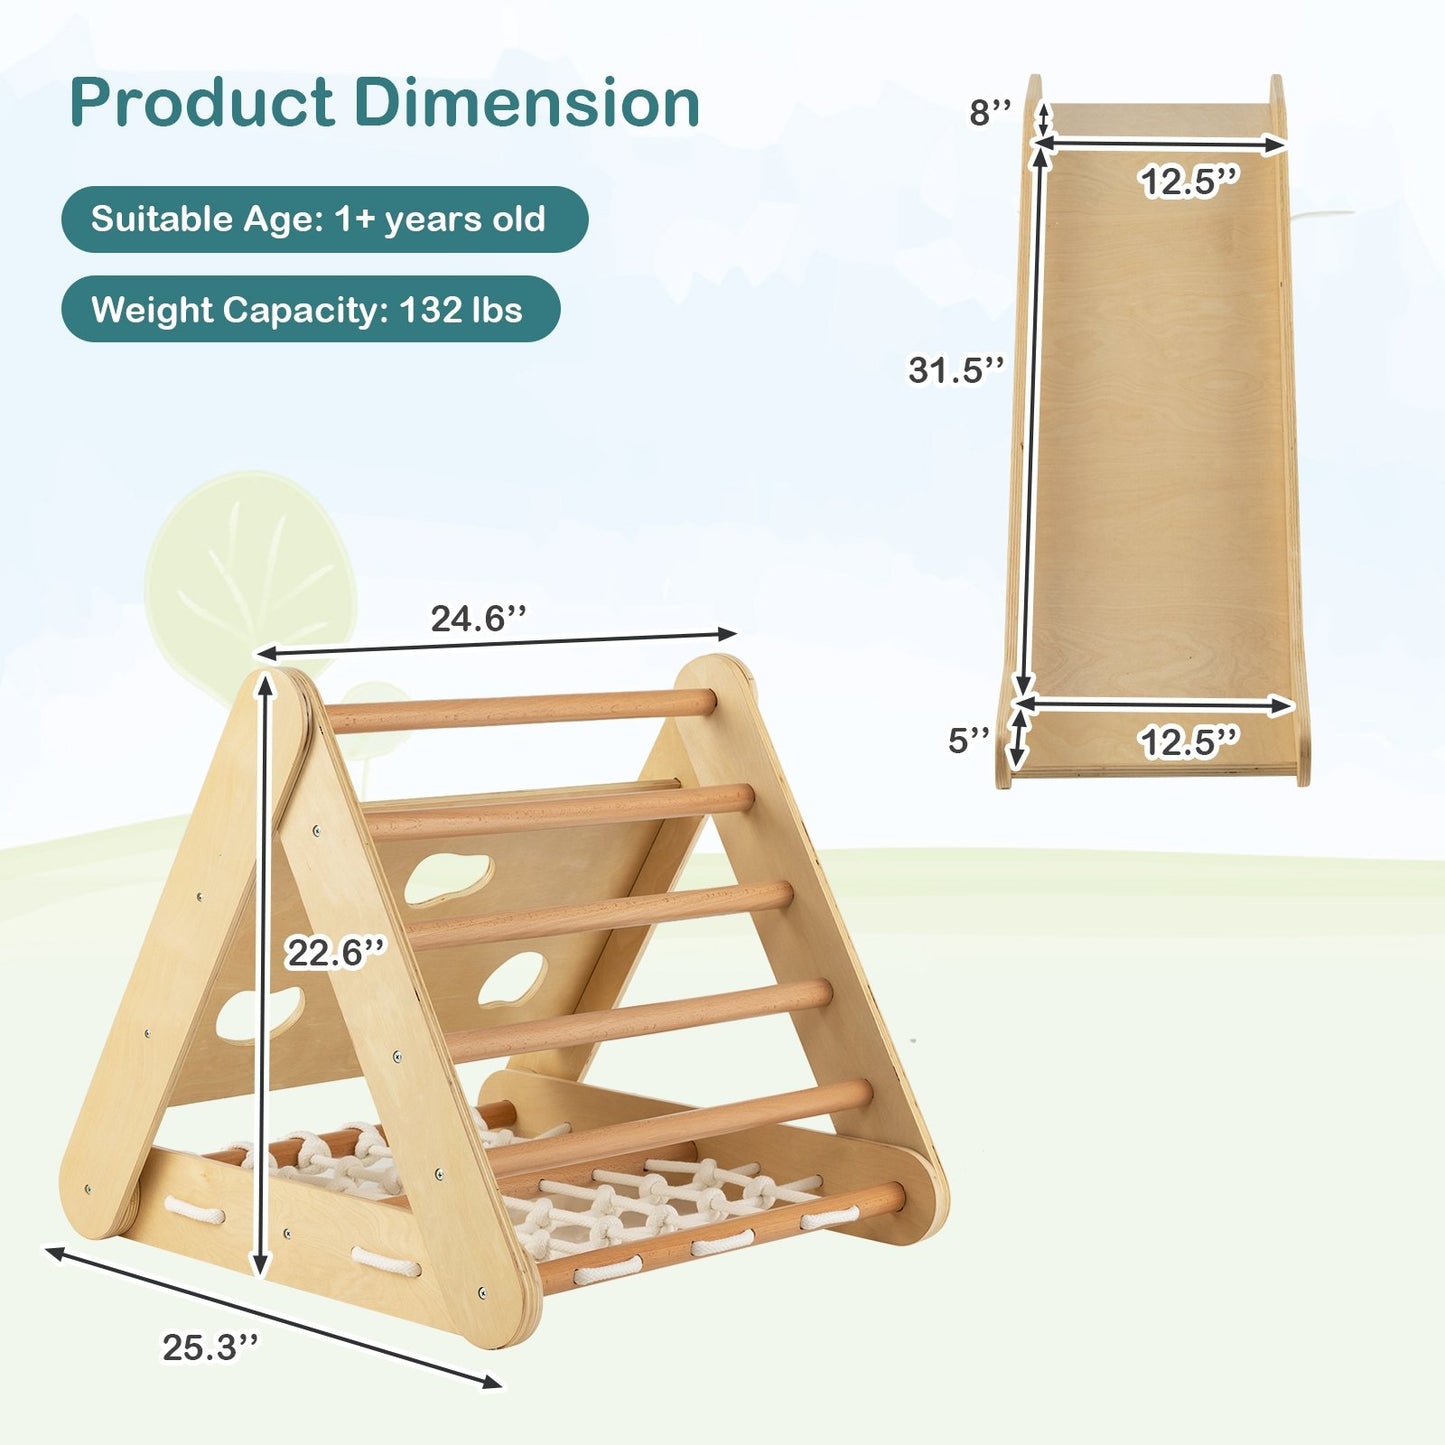 4 in 1 Triangle Climber Toy with Sliding Board and Climbing Net, Natural